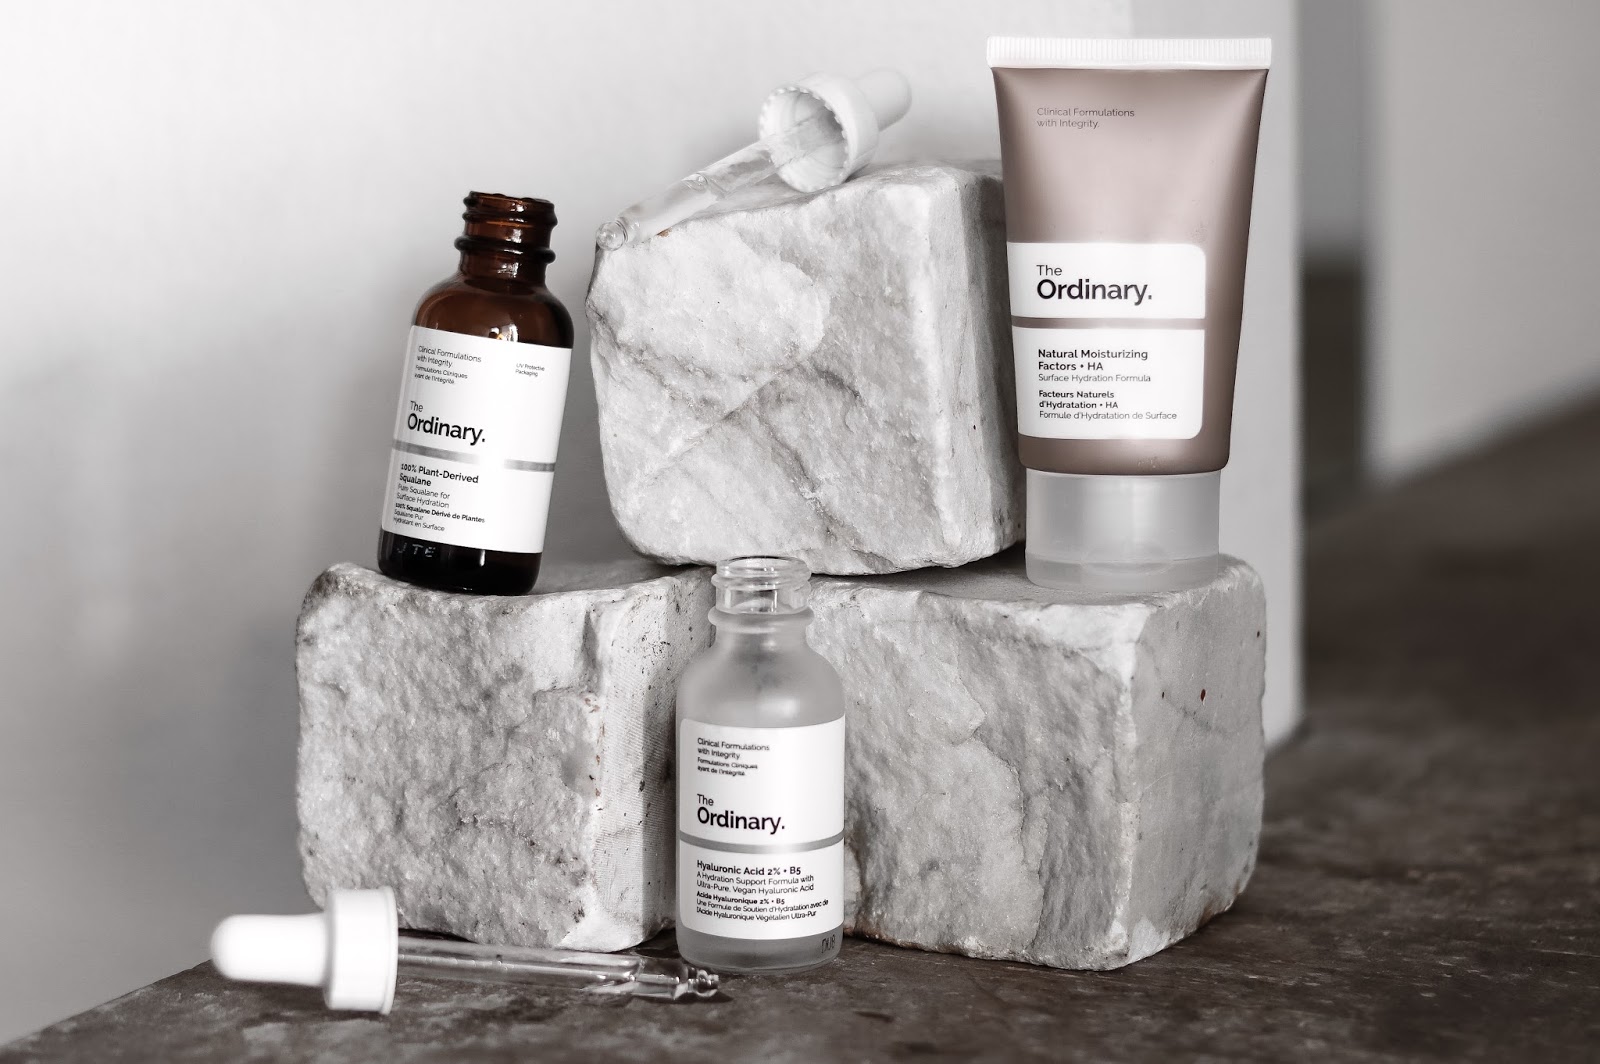 The Ordinary Review Worth The Hype // Beauty by Almost Chic